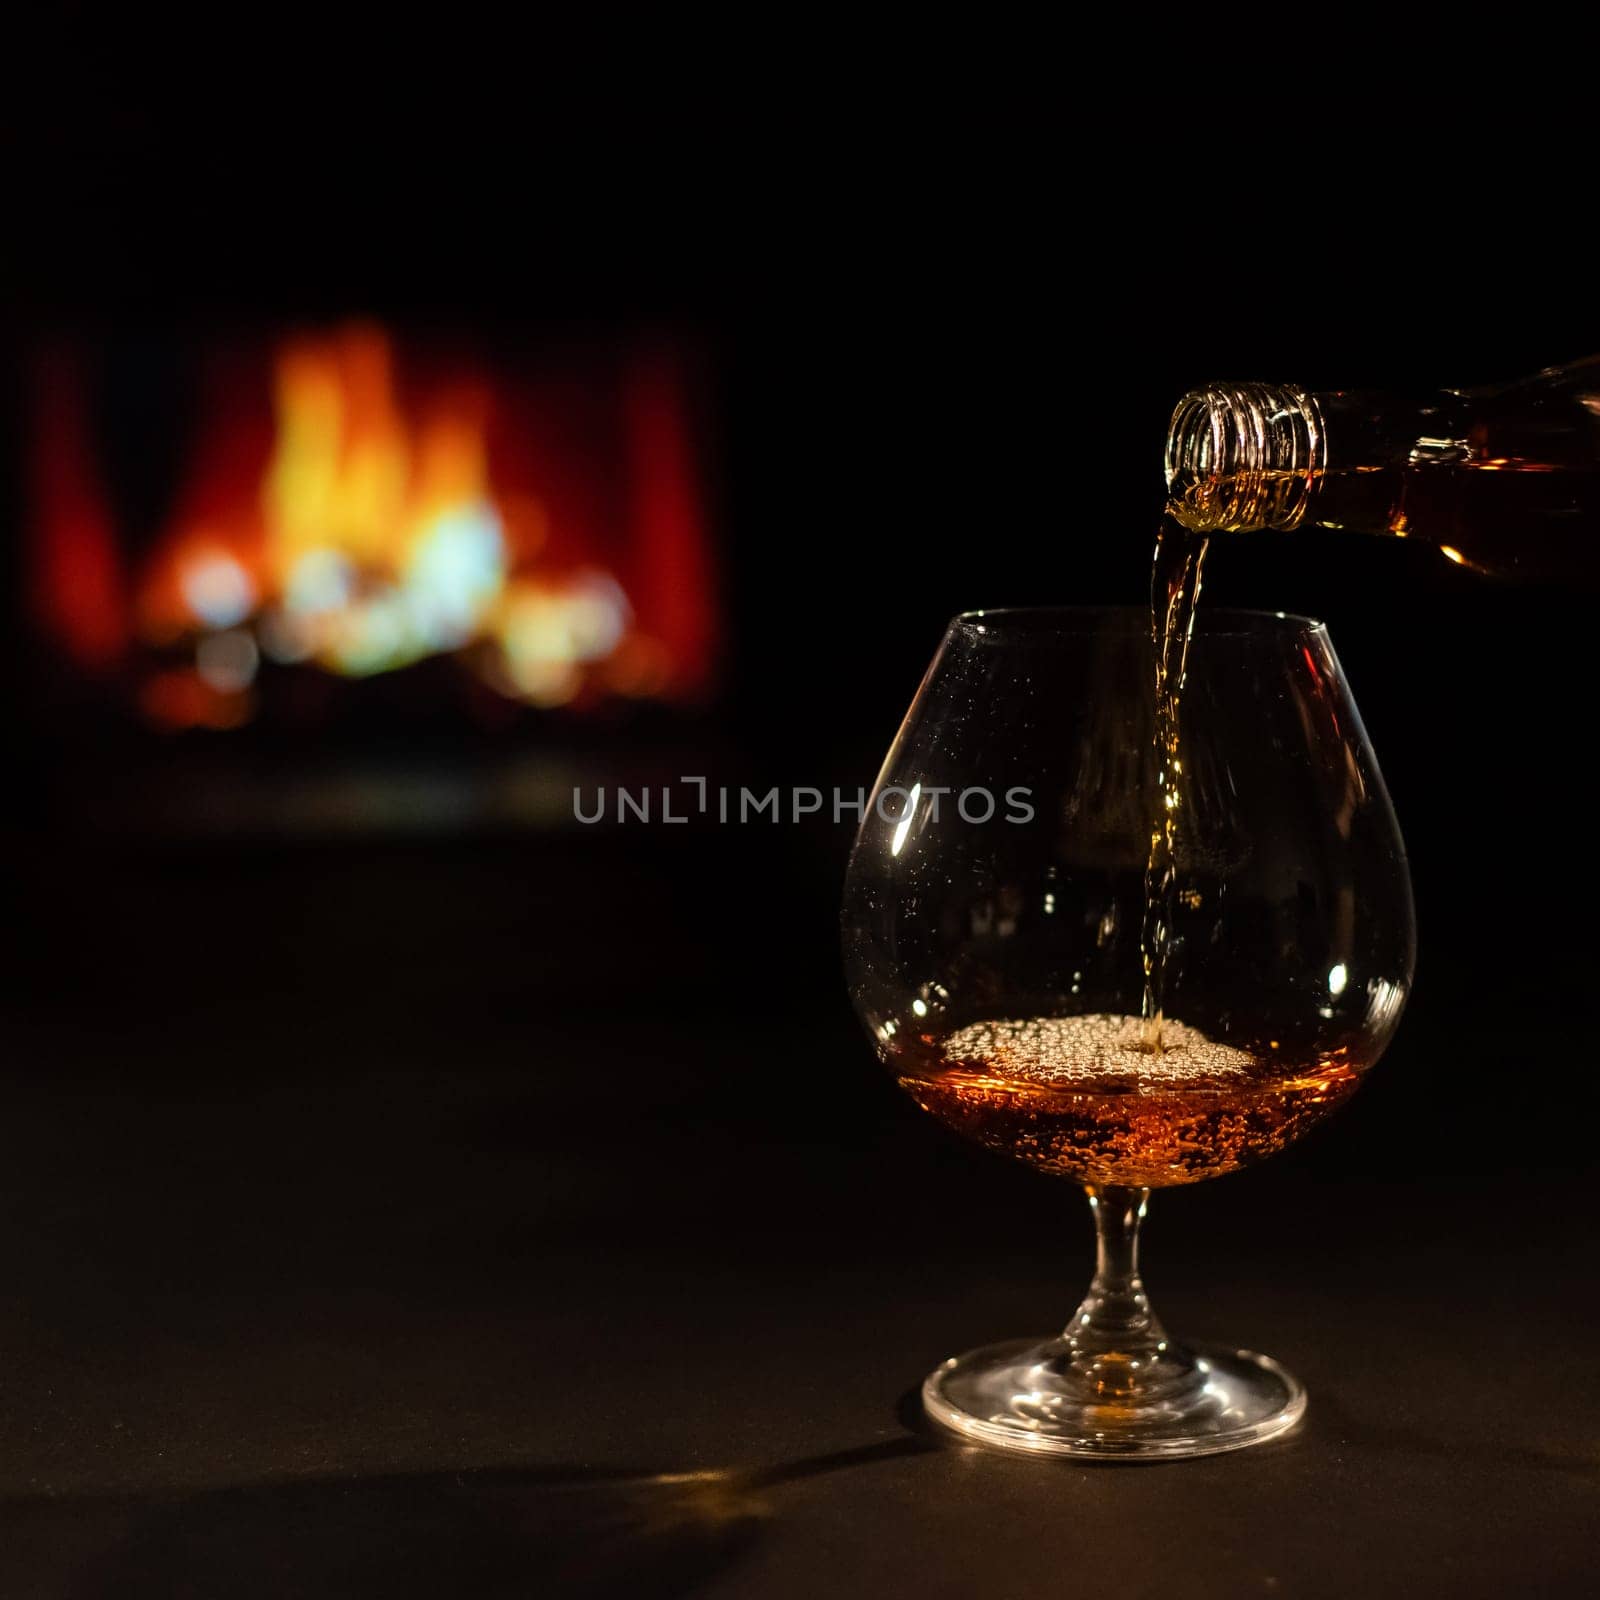 Pour brandy into a glass against the background of the fireplace.